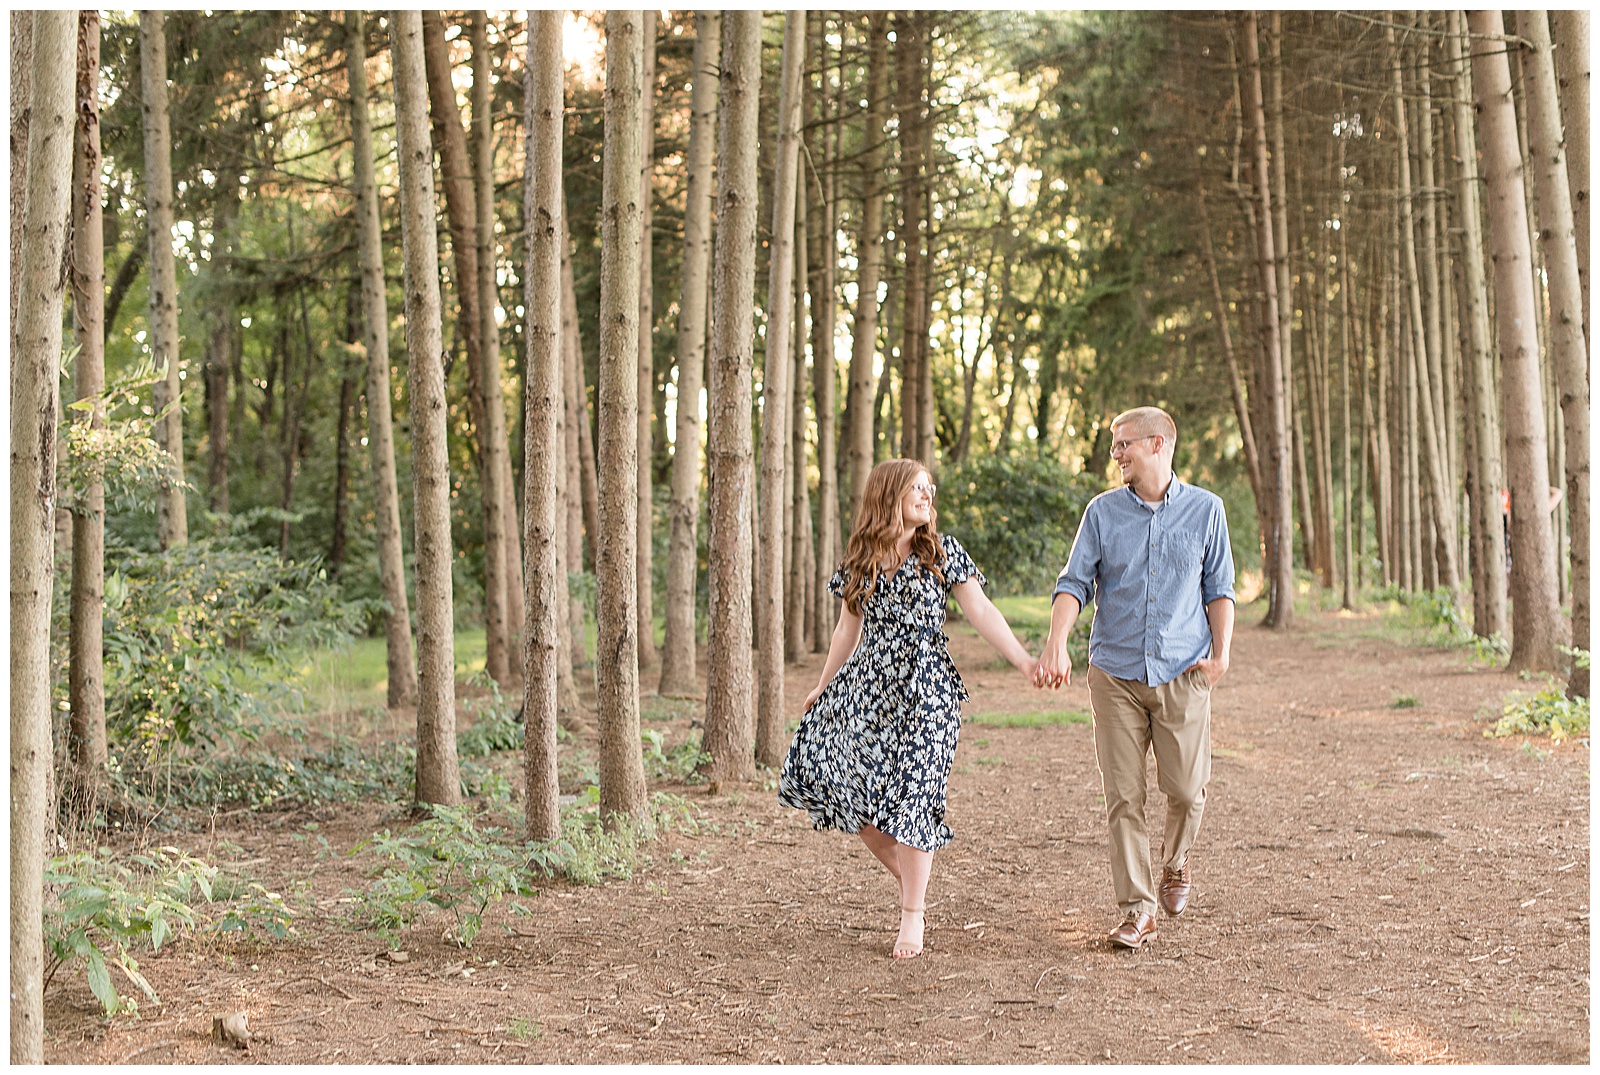 couple walking in a grove of pine trees smiling at each other while girl holds onto dress as it blows in the wind